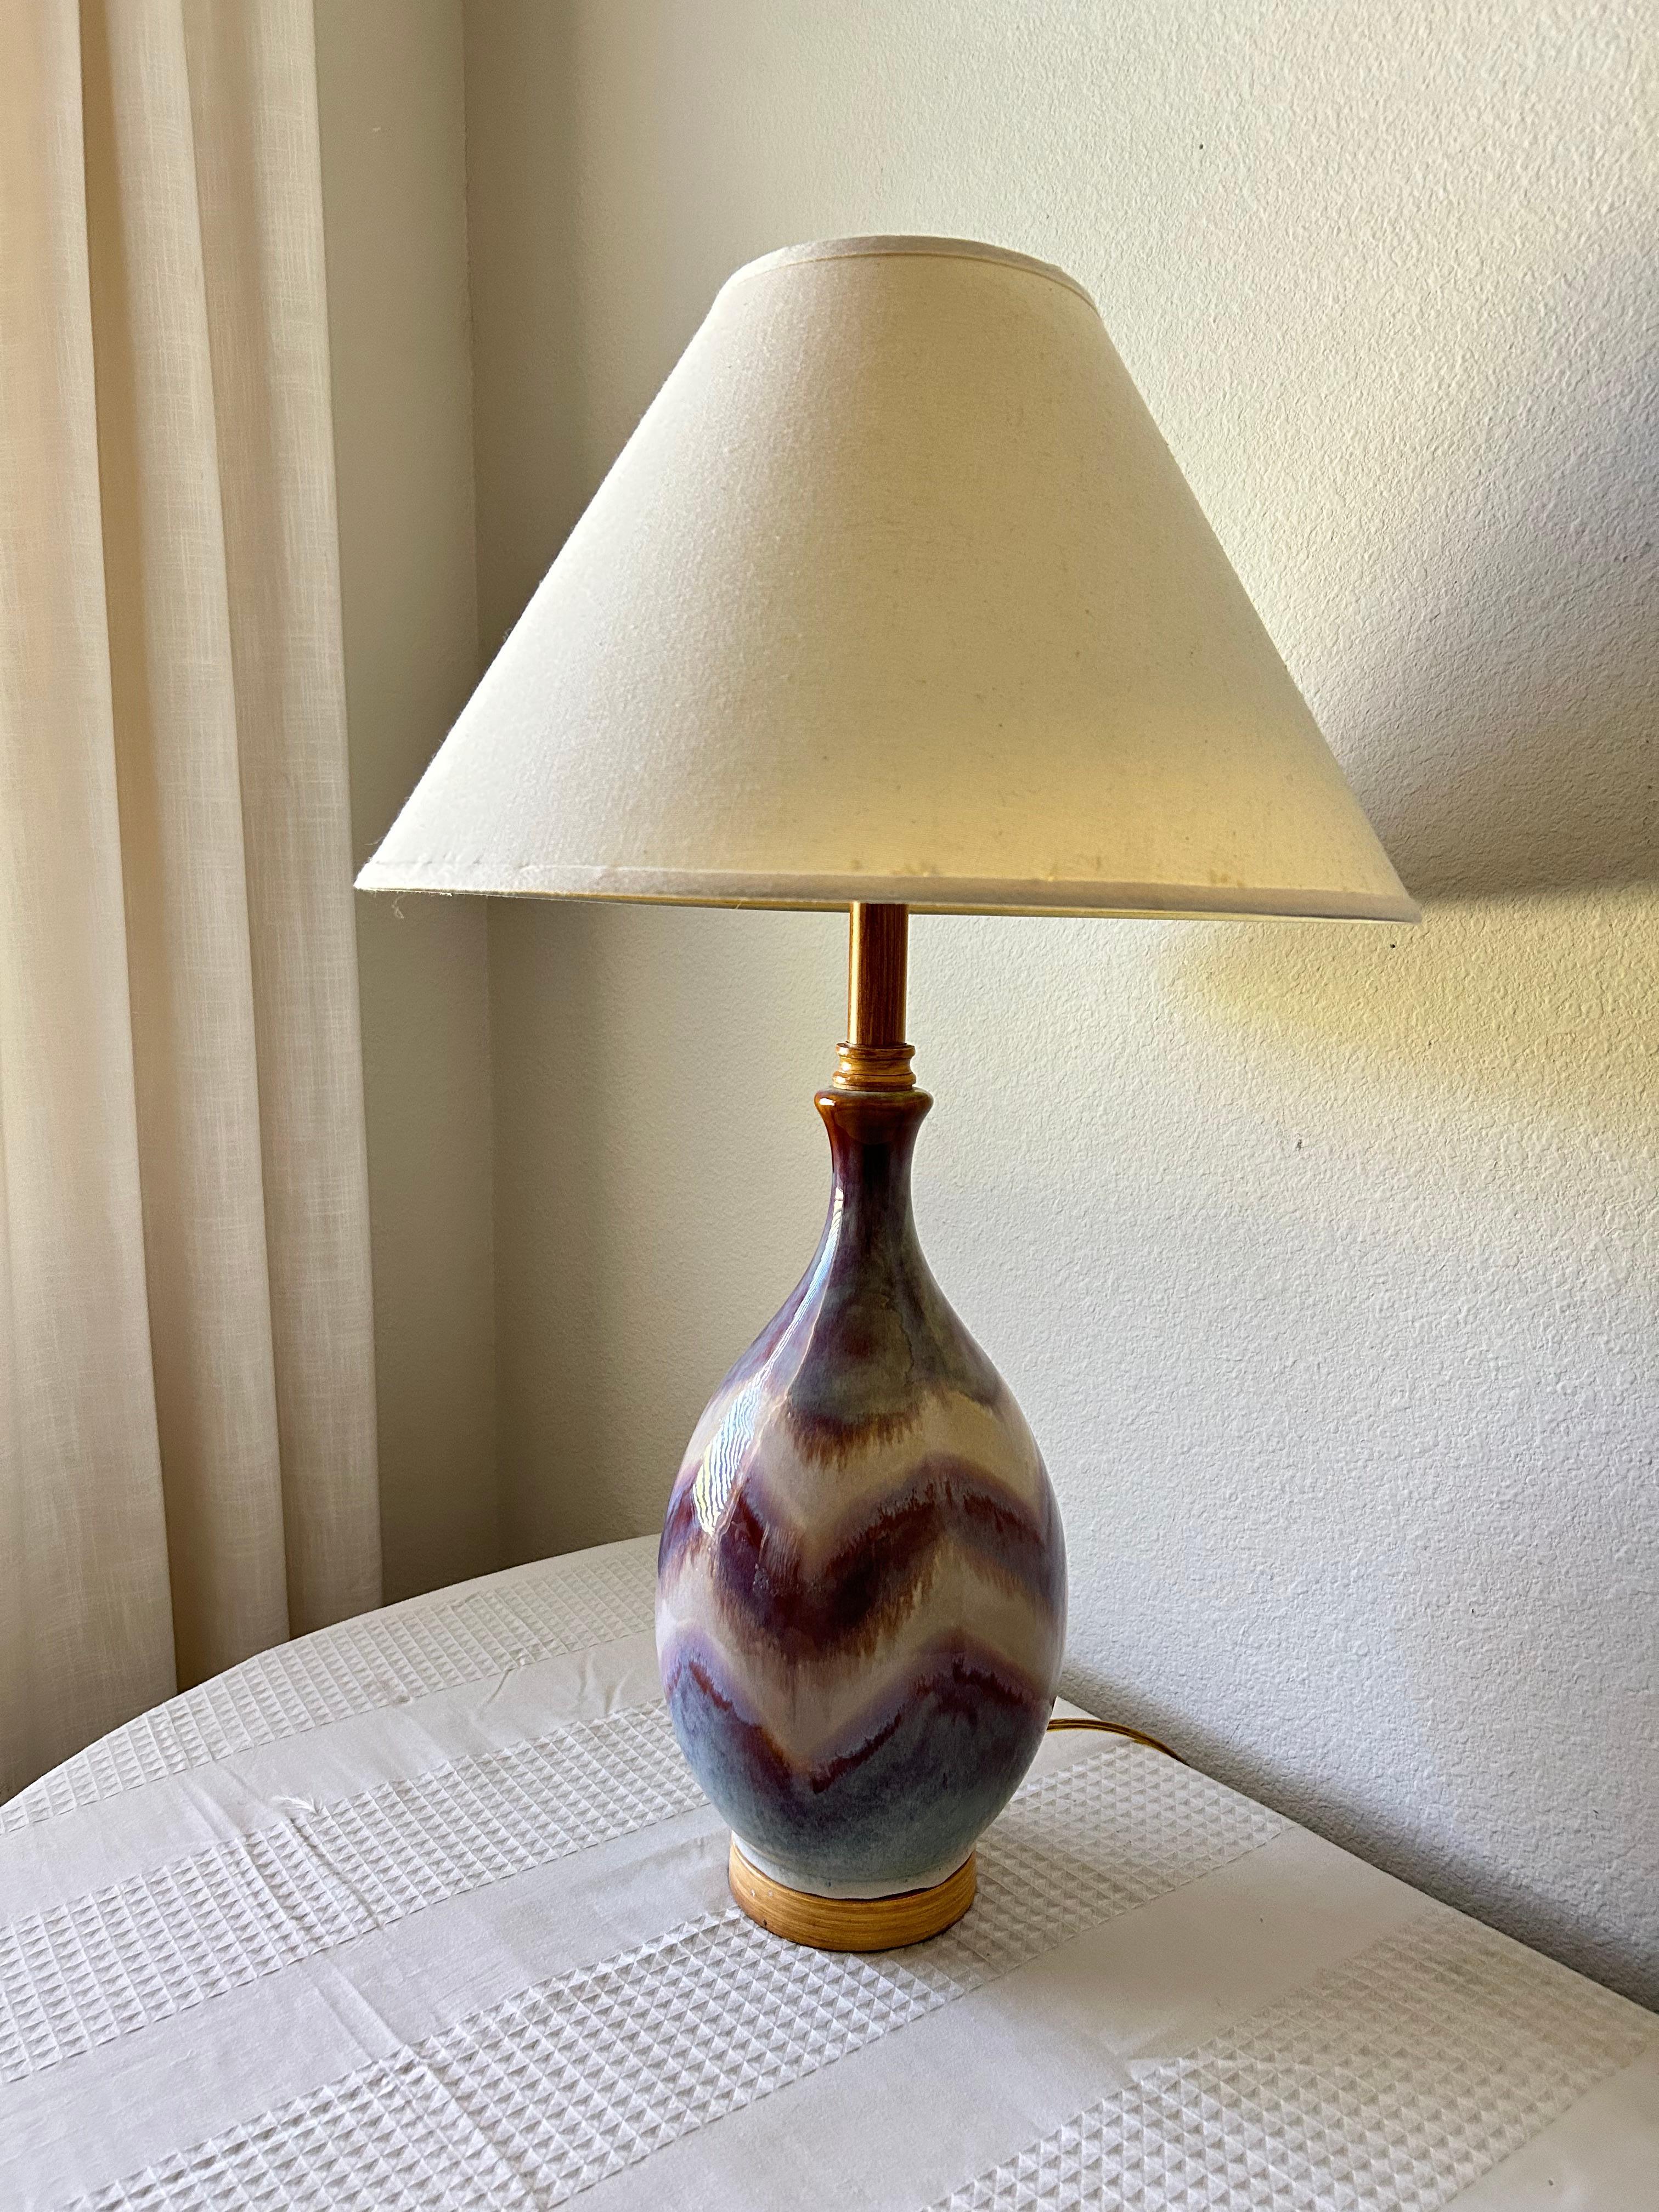 A multi-color table lamp from the mid to late twentieth century.
Lamp shade measures 17 inches